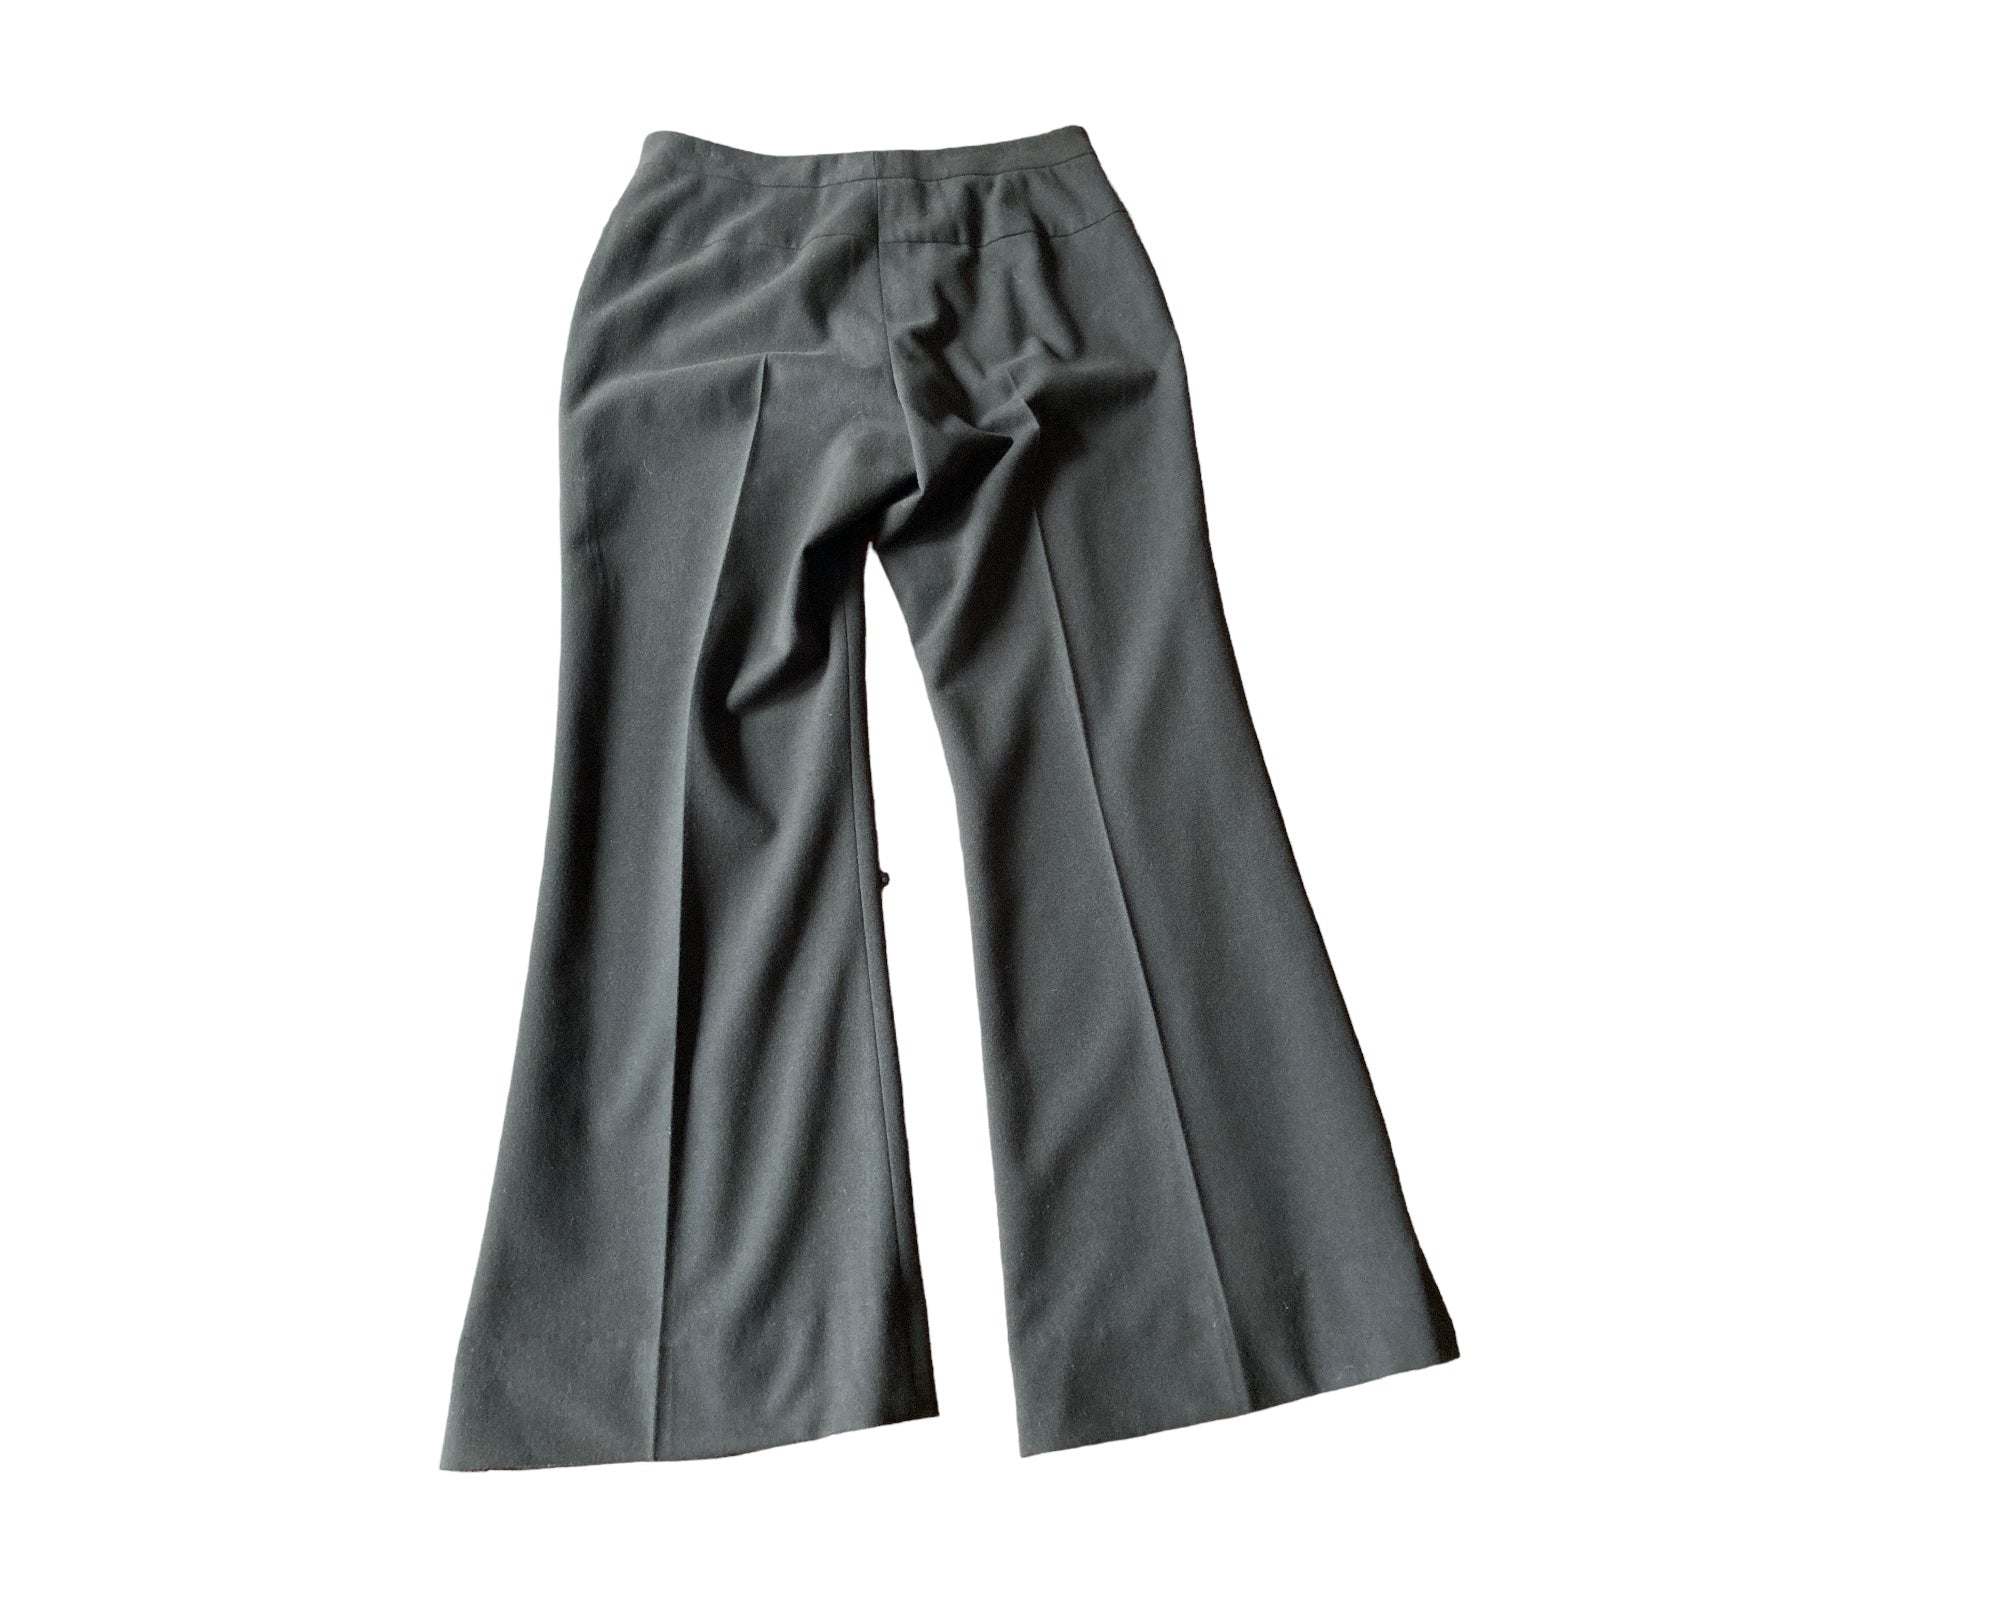 EtCetera Loden Trousers, 8